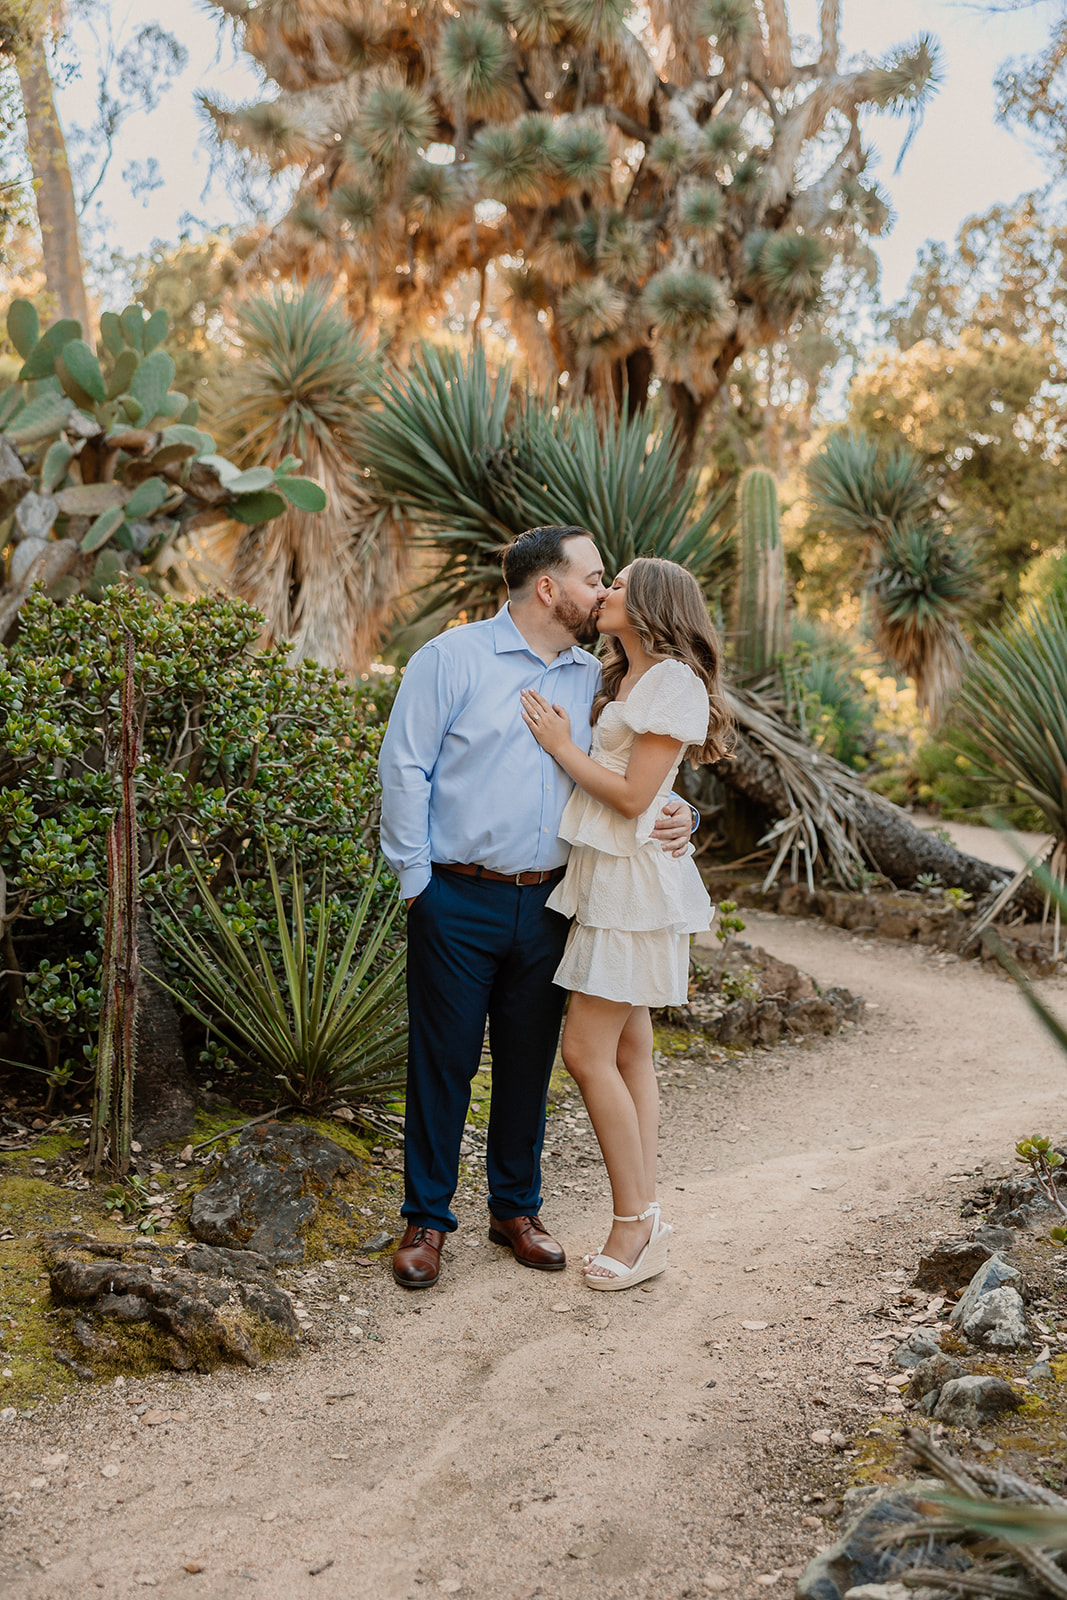 A man and woman stand on a dirt path in a garden, sharing a kiss. The man is in a blue shirt and dark pants, and the woman is in a white dress. Greenery and various plants surround them for their engagement photos at cactus garden in stanford